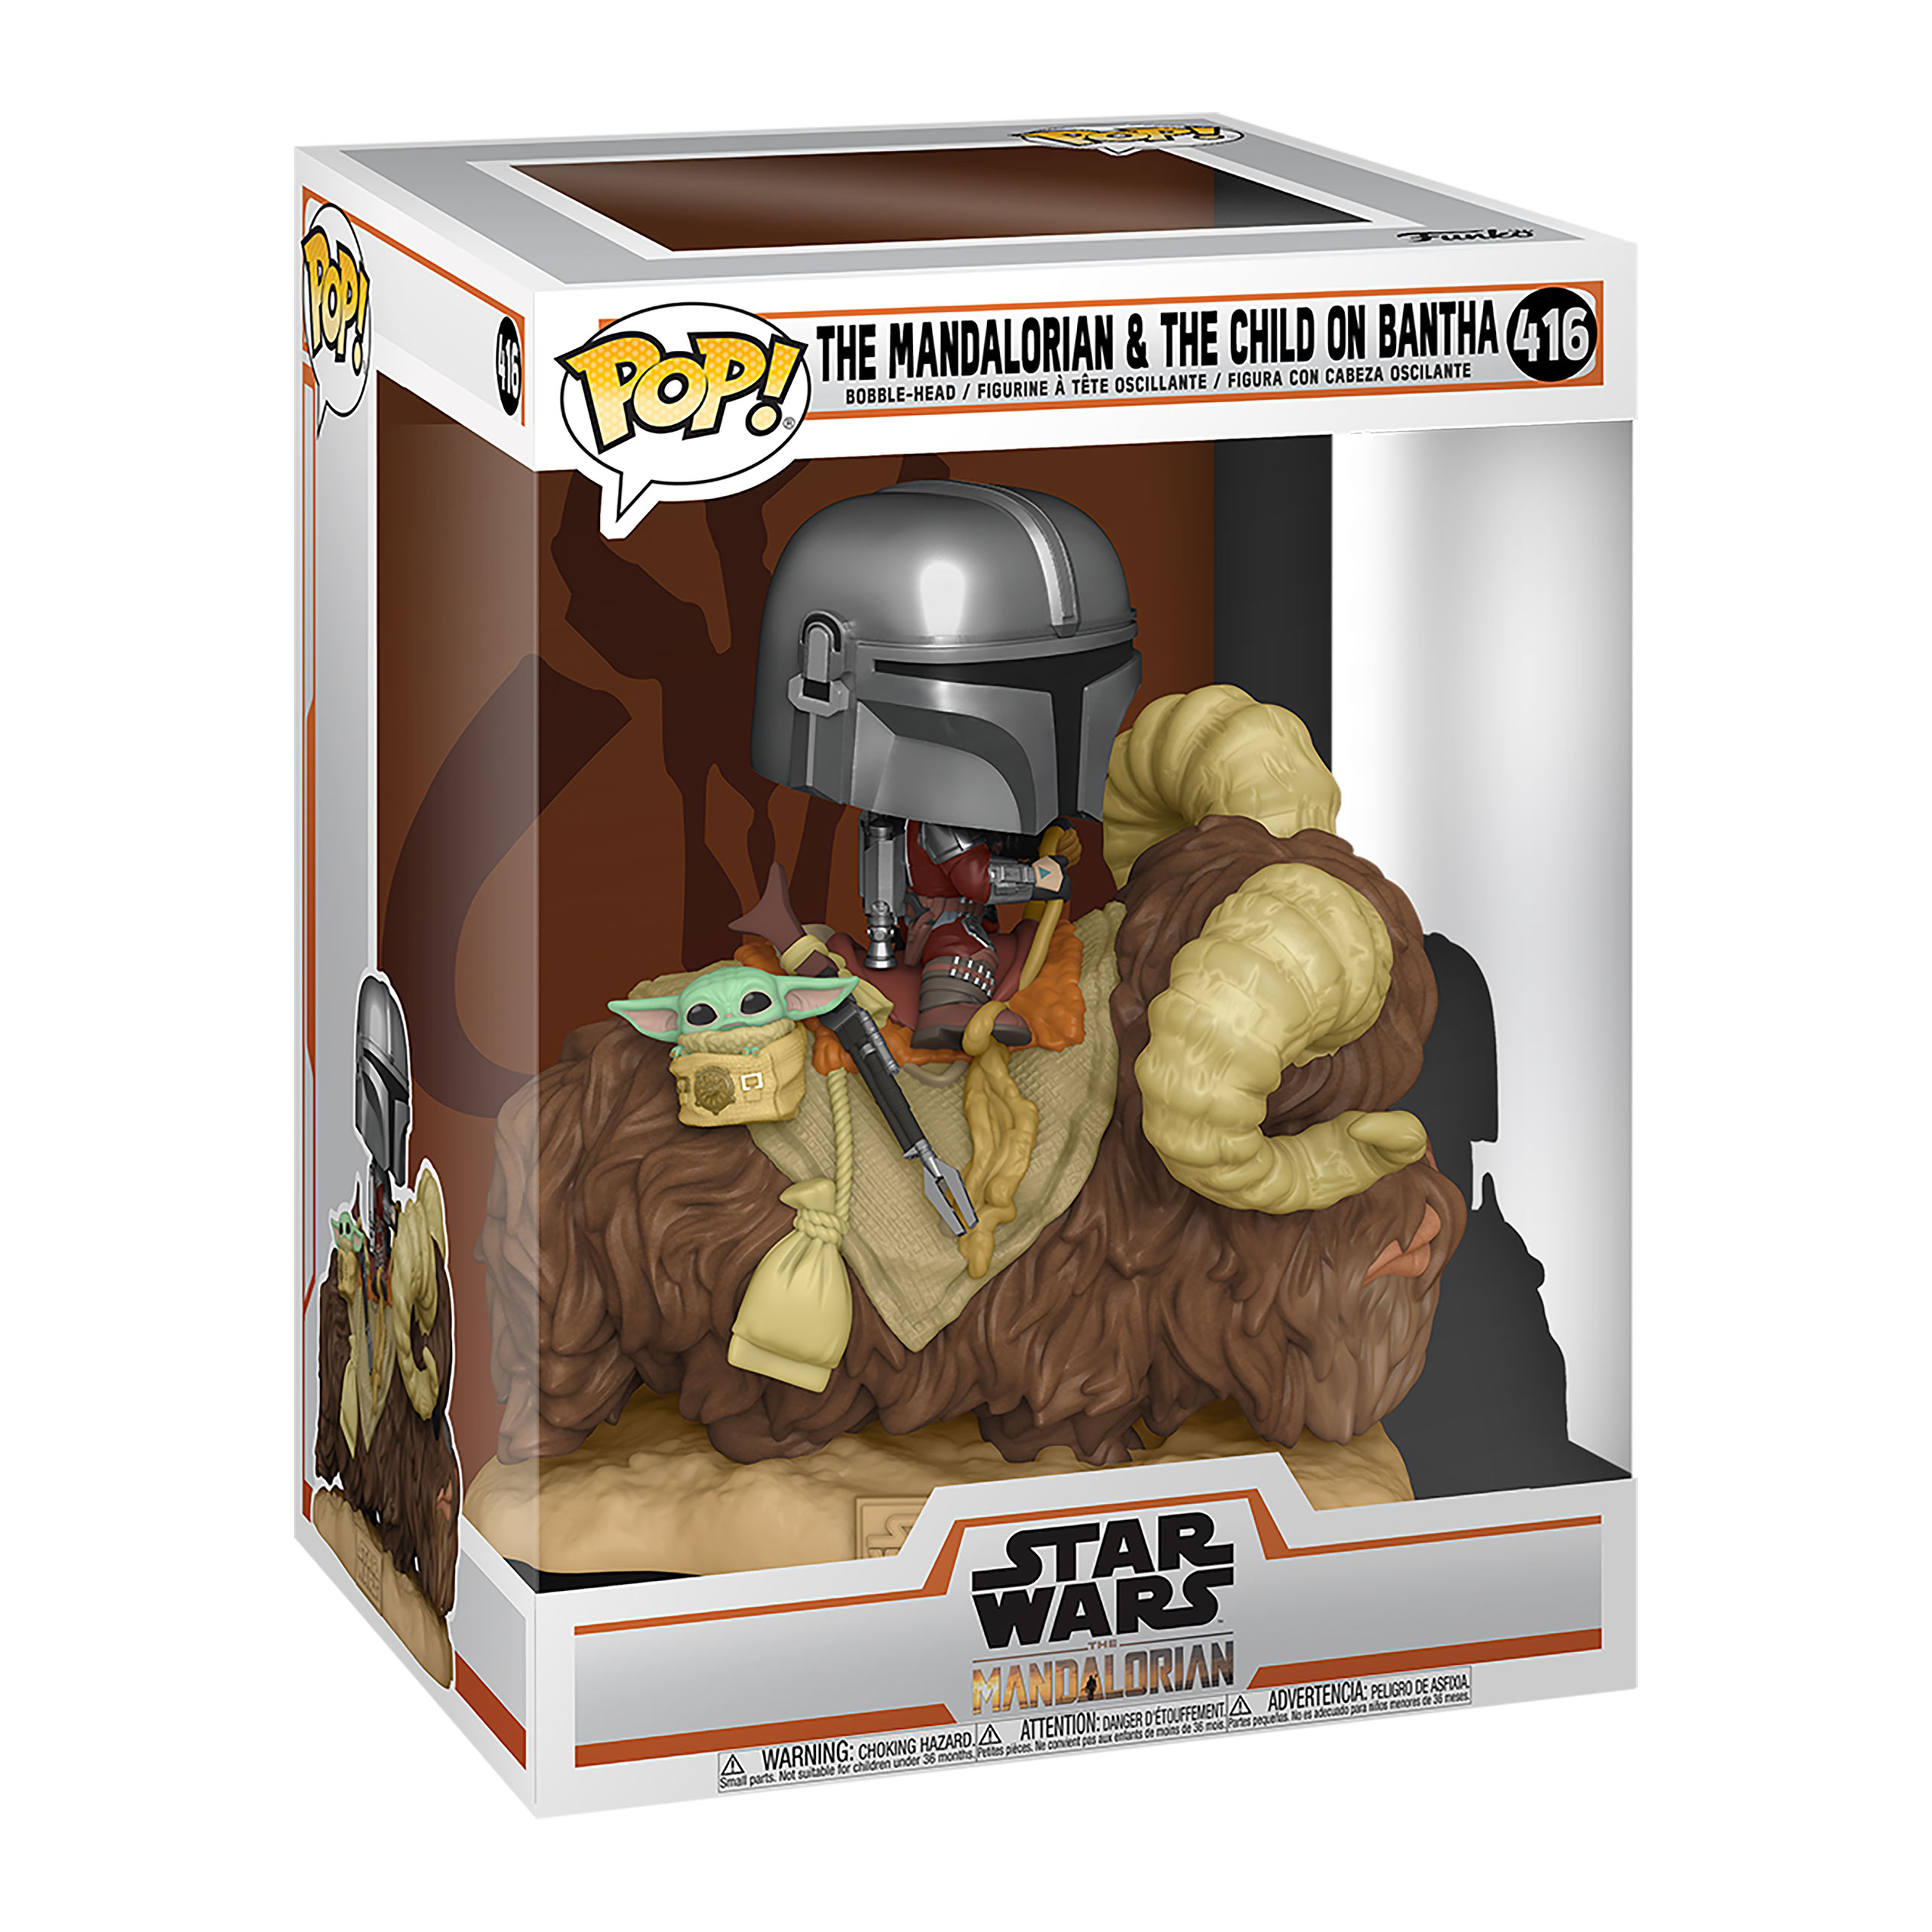 The Mandalorian with The Child on Bantha Funko Pop bobblehead figure - Star Wars